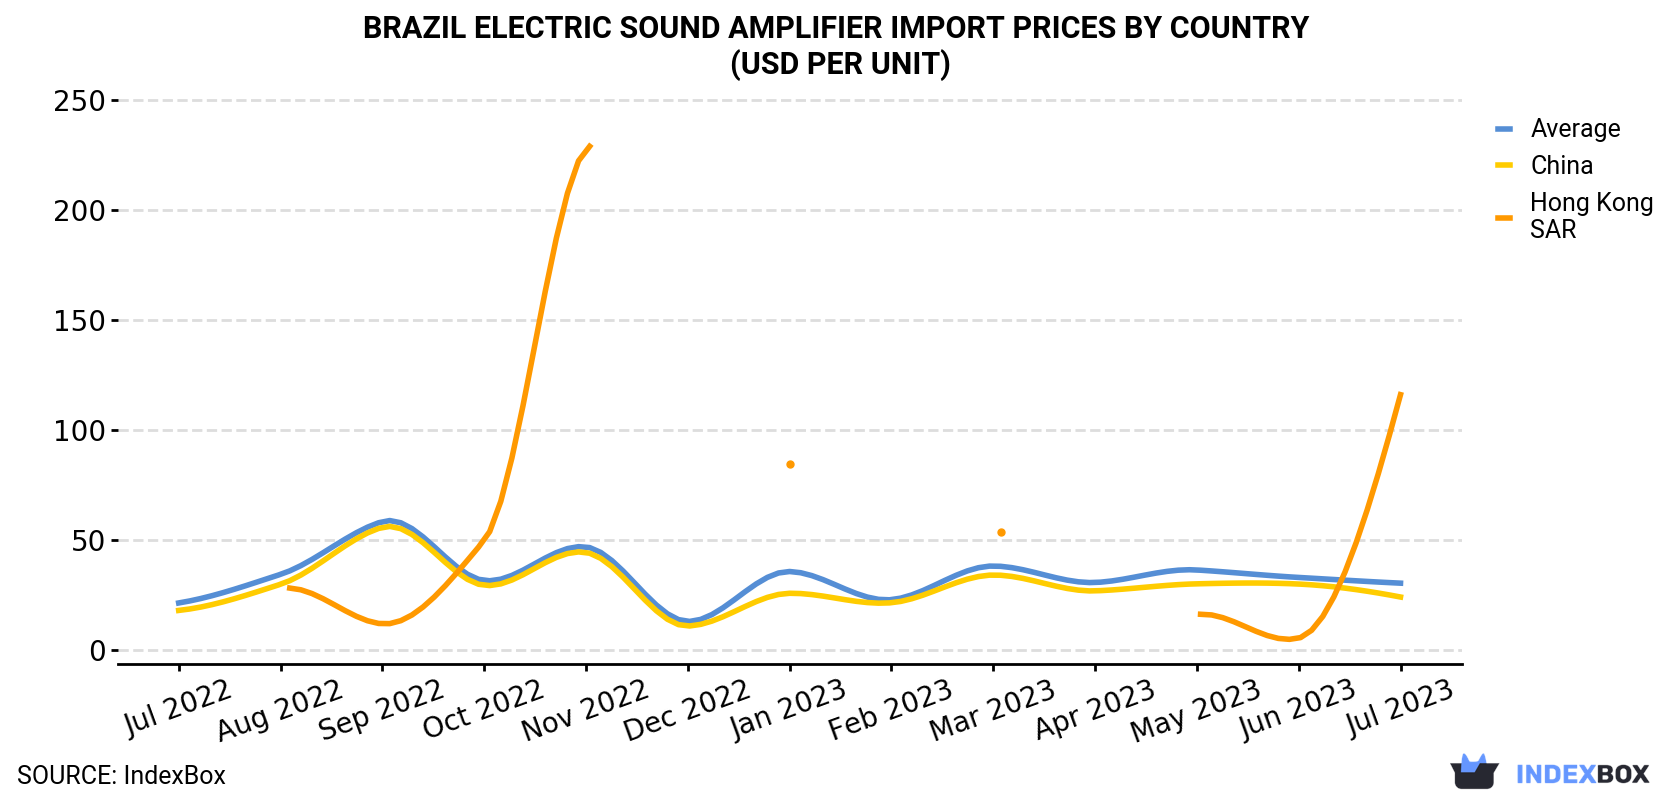 Brazil Electric Sound Amplifier Import Prices By Country (USD Per Unit)